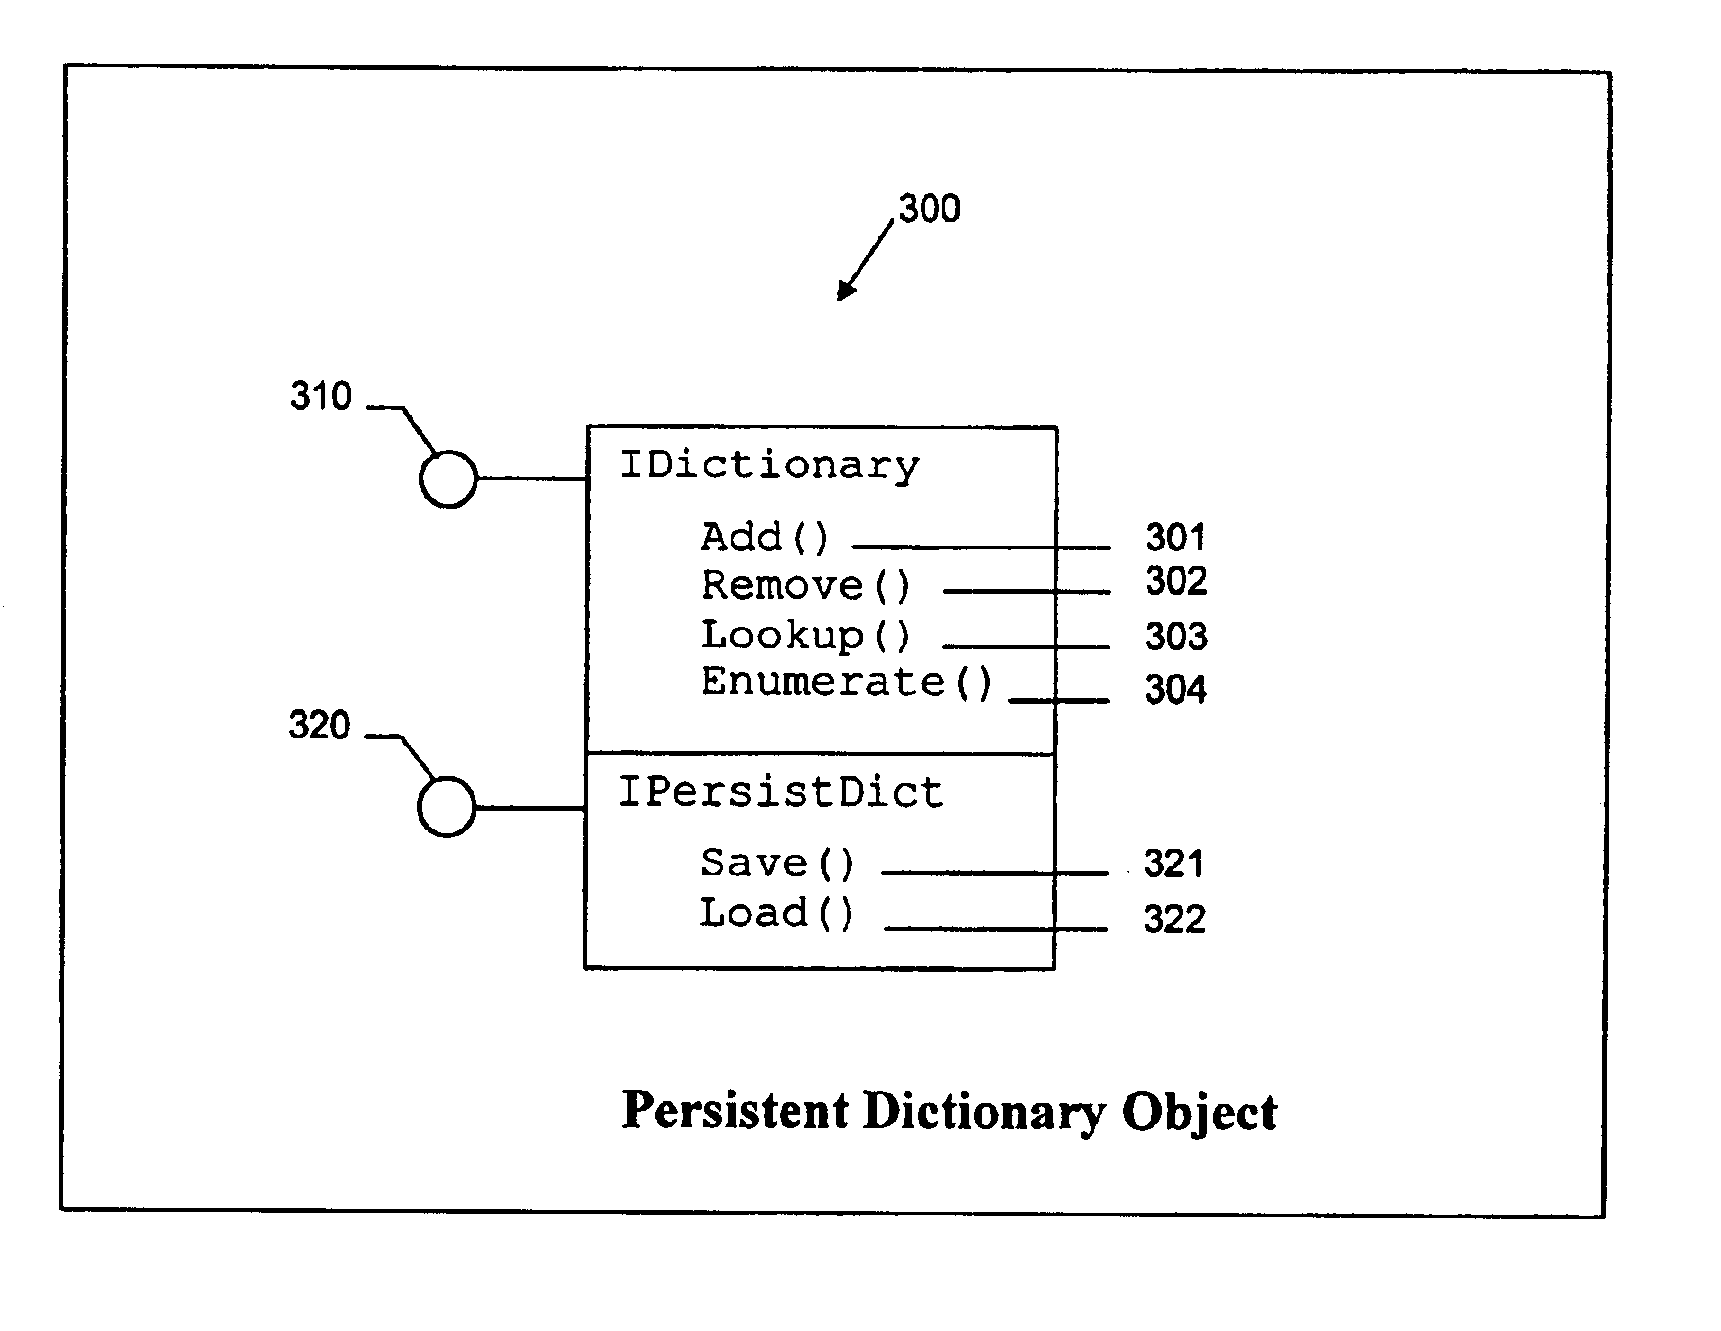 Method and apparatus for creating, sending, and using self-descriptive objects as messages over a message queuing network